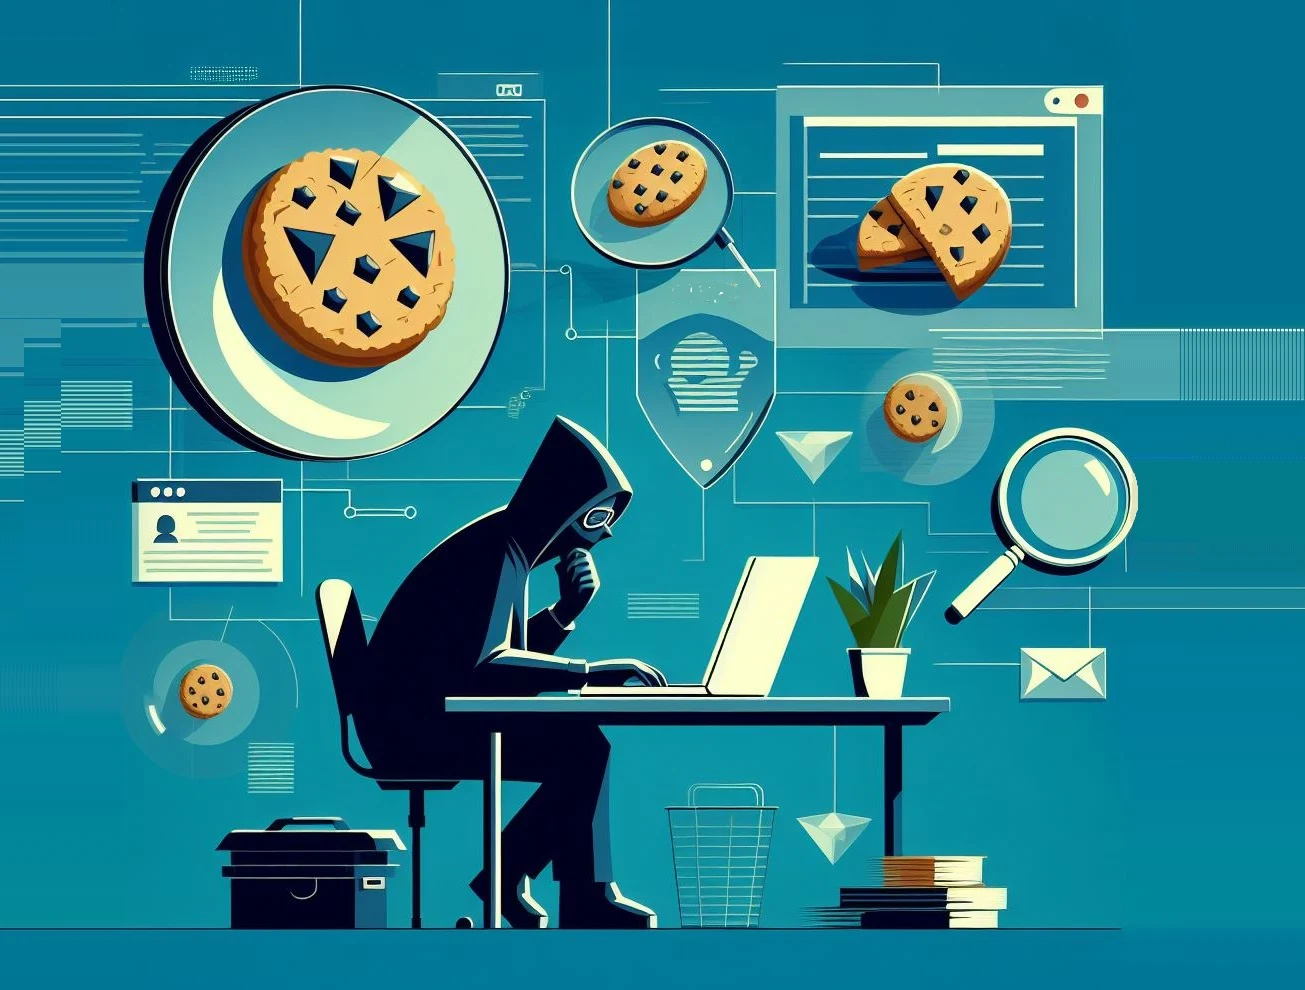 Cookie theft poses significant risks, especially if it compromises Google accounts, potentially leading to widespread data breaches across linked platforms.